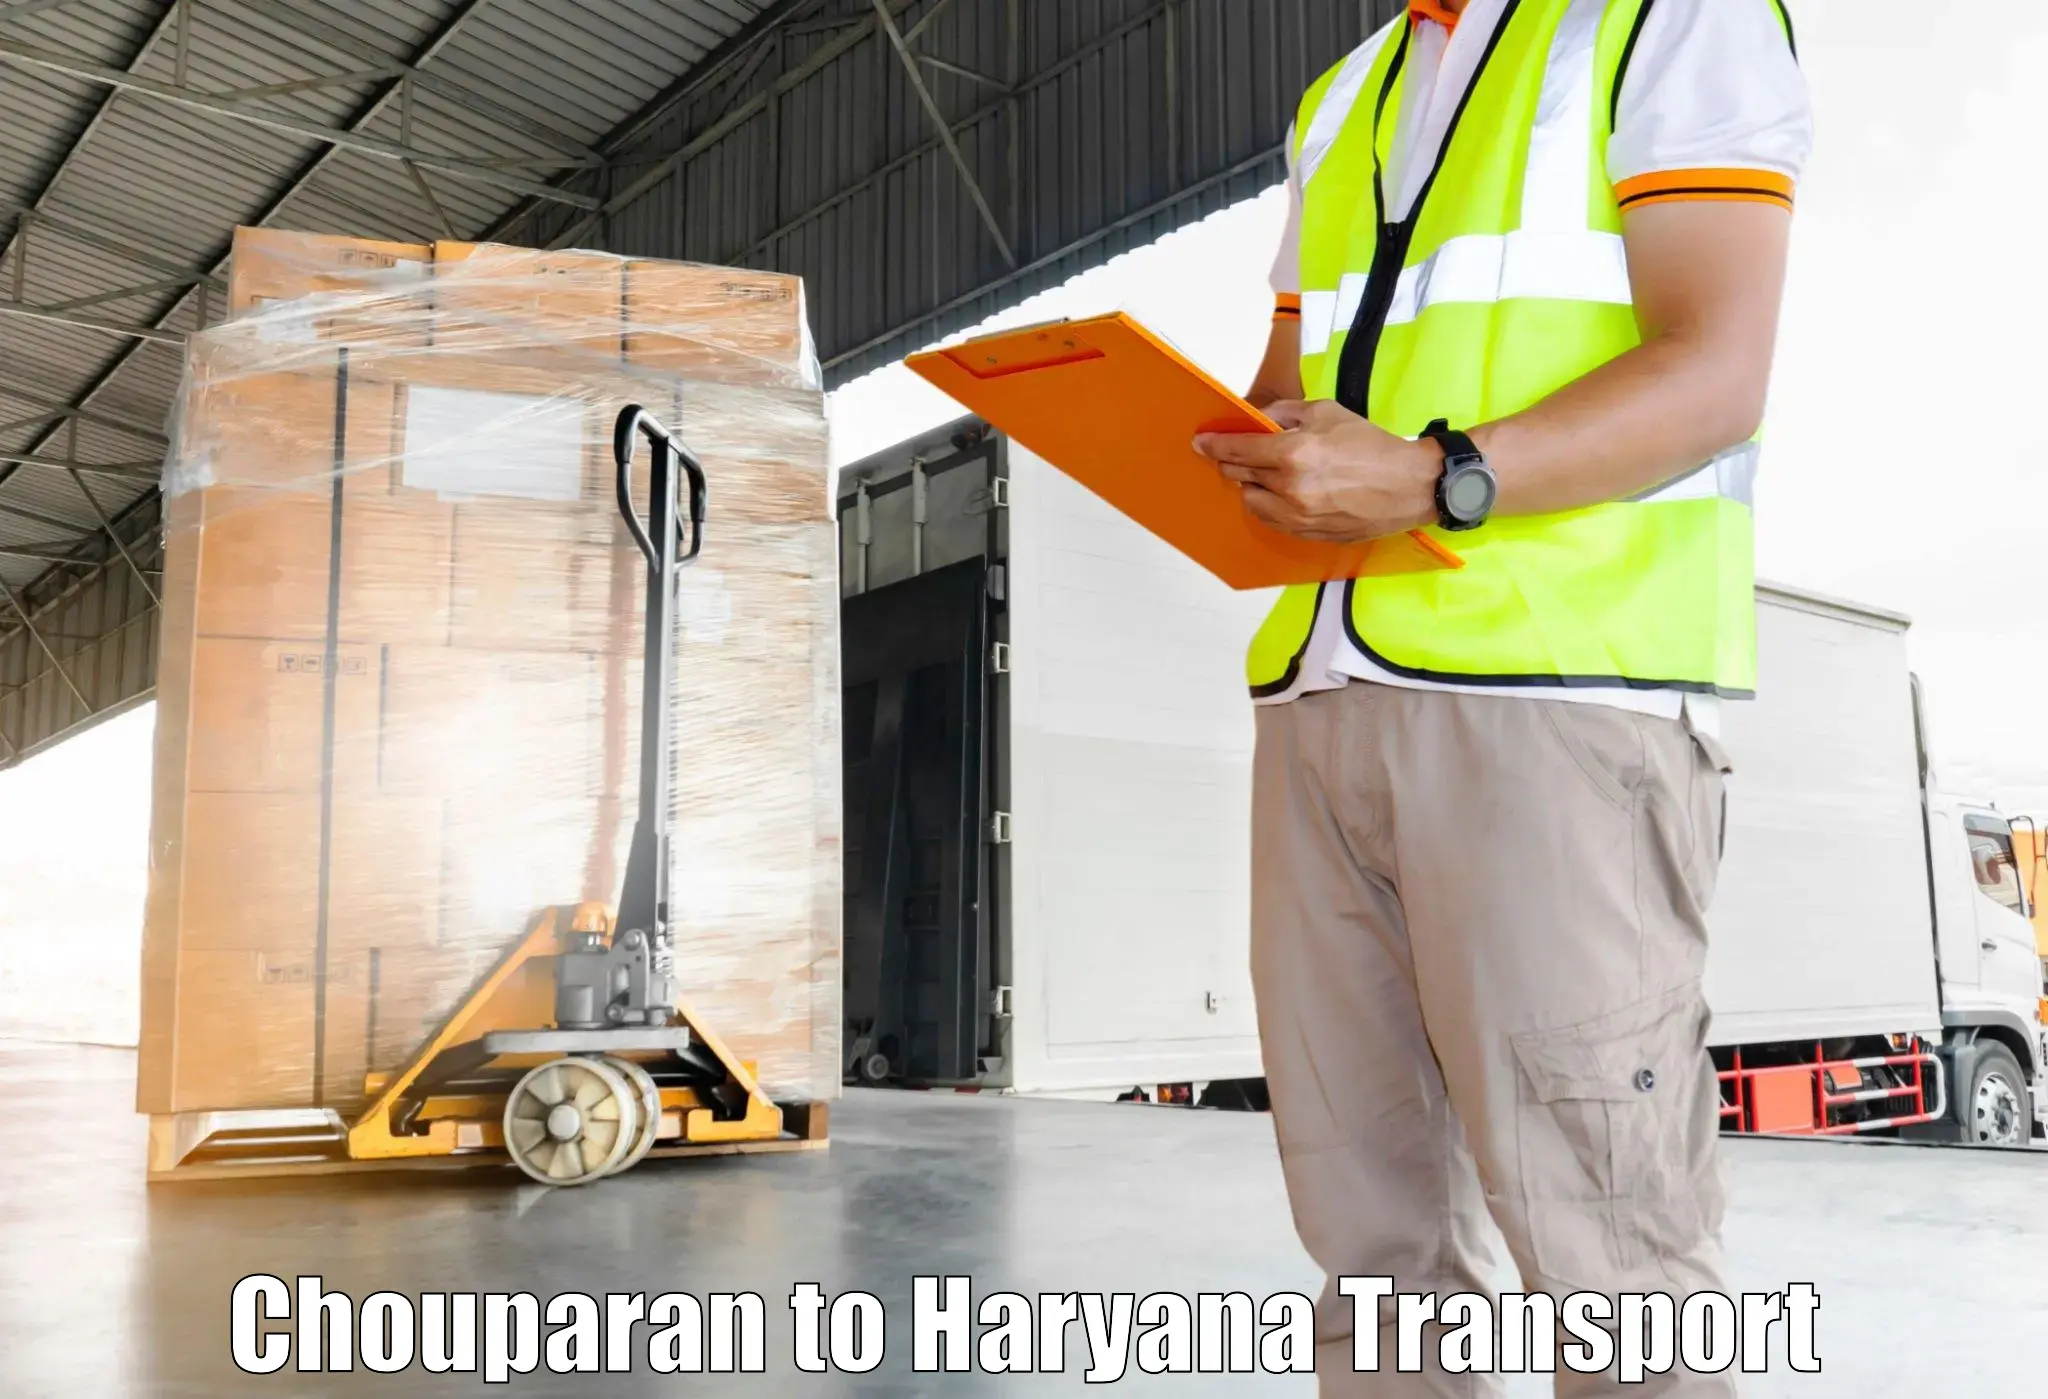 Express transport services in Chouparan to Bilaspur Haryana